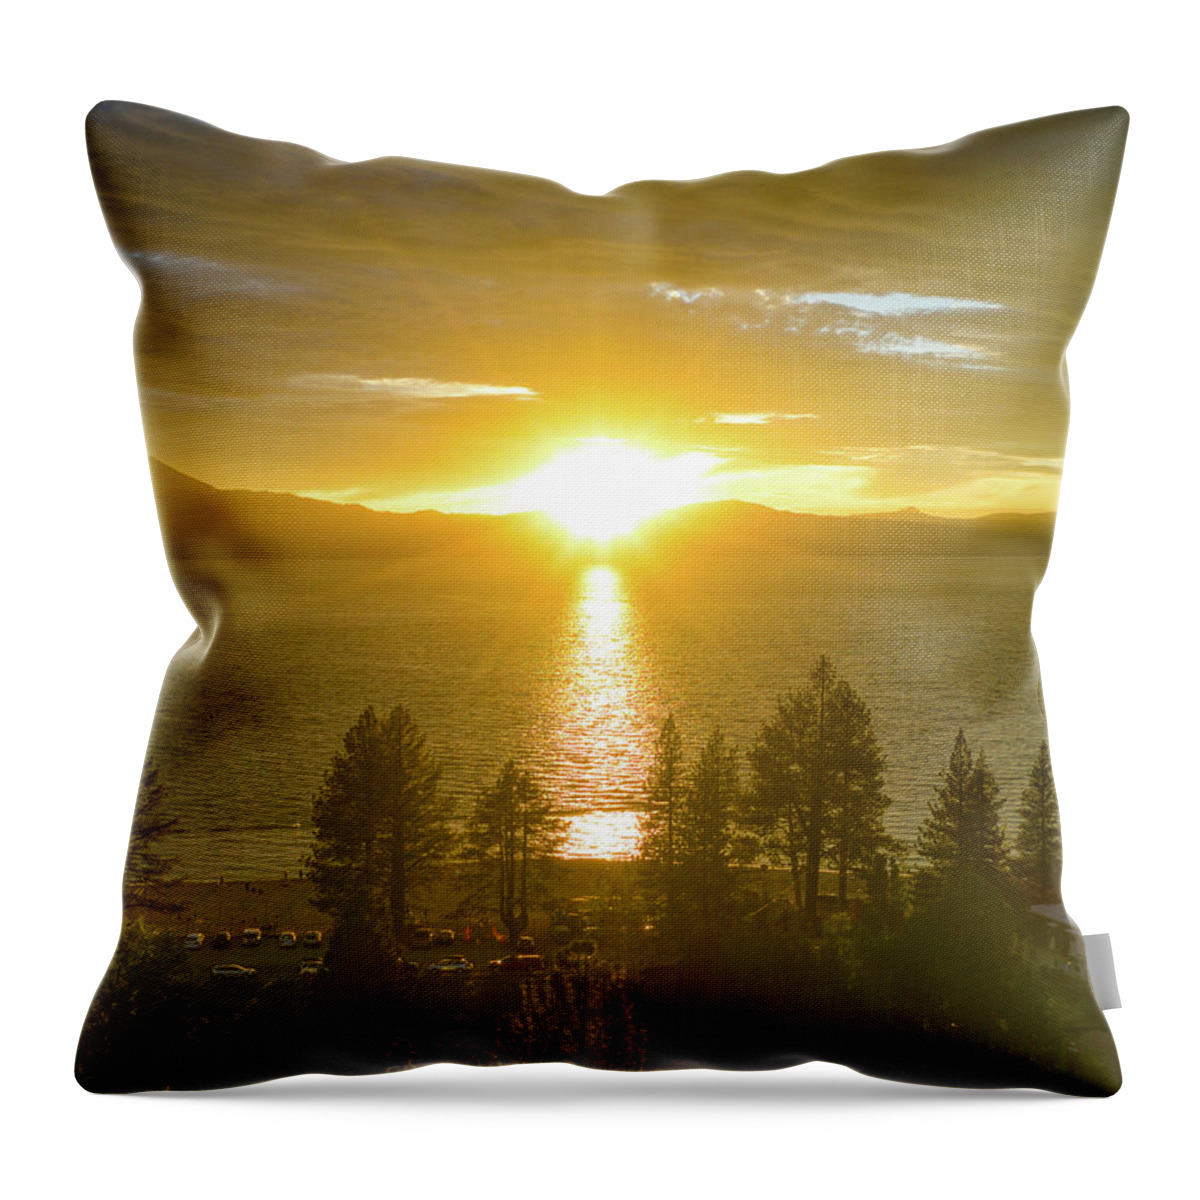 Lake Tahoe Throw Pillow featuring the photograph Lake Tahoe Sunset Glow by Anthony Giammarino